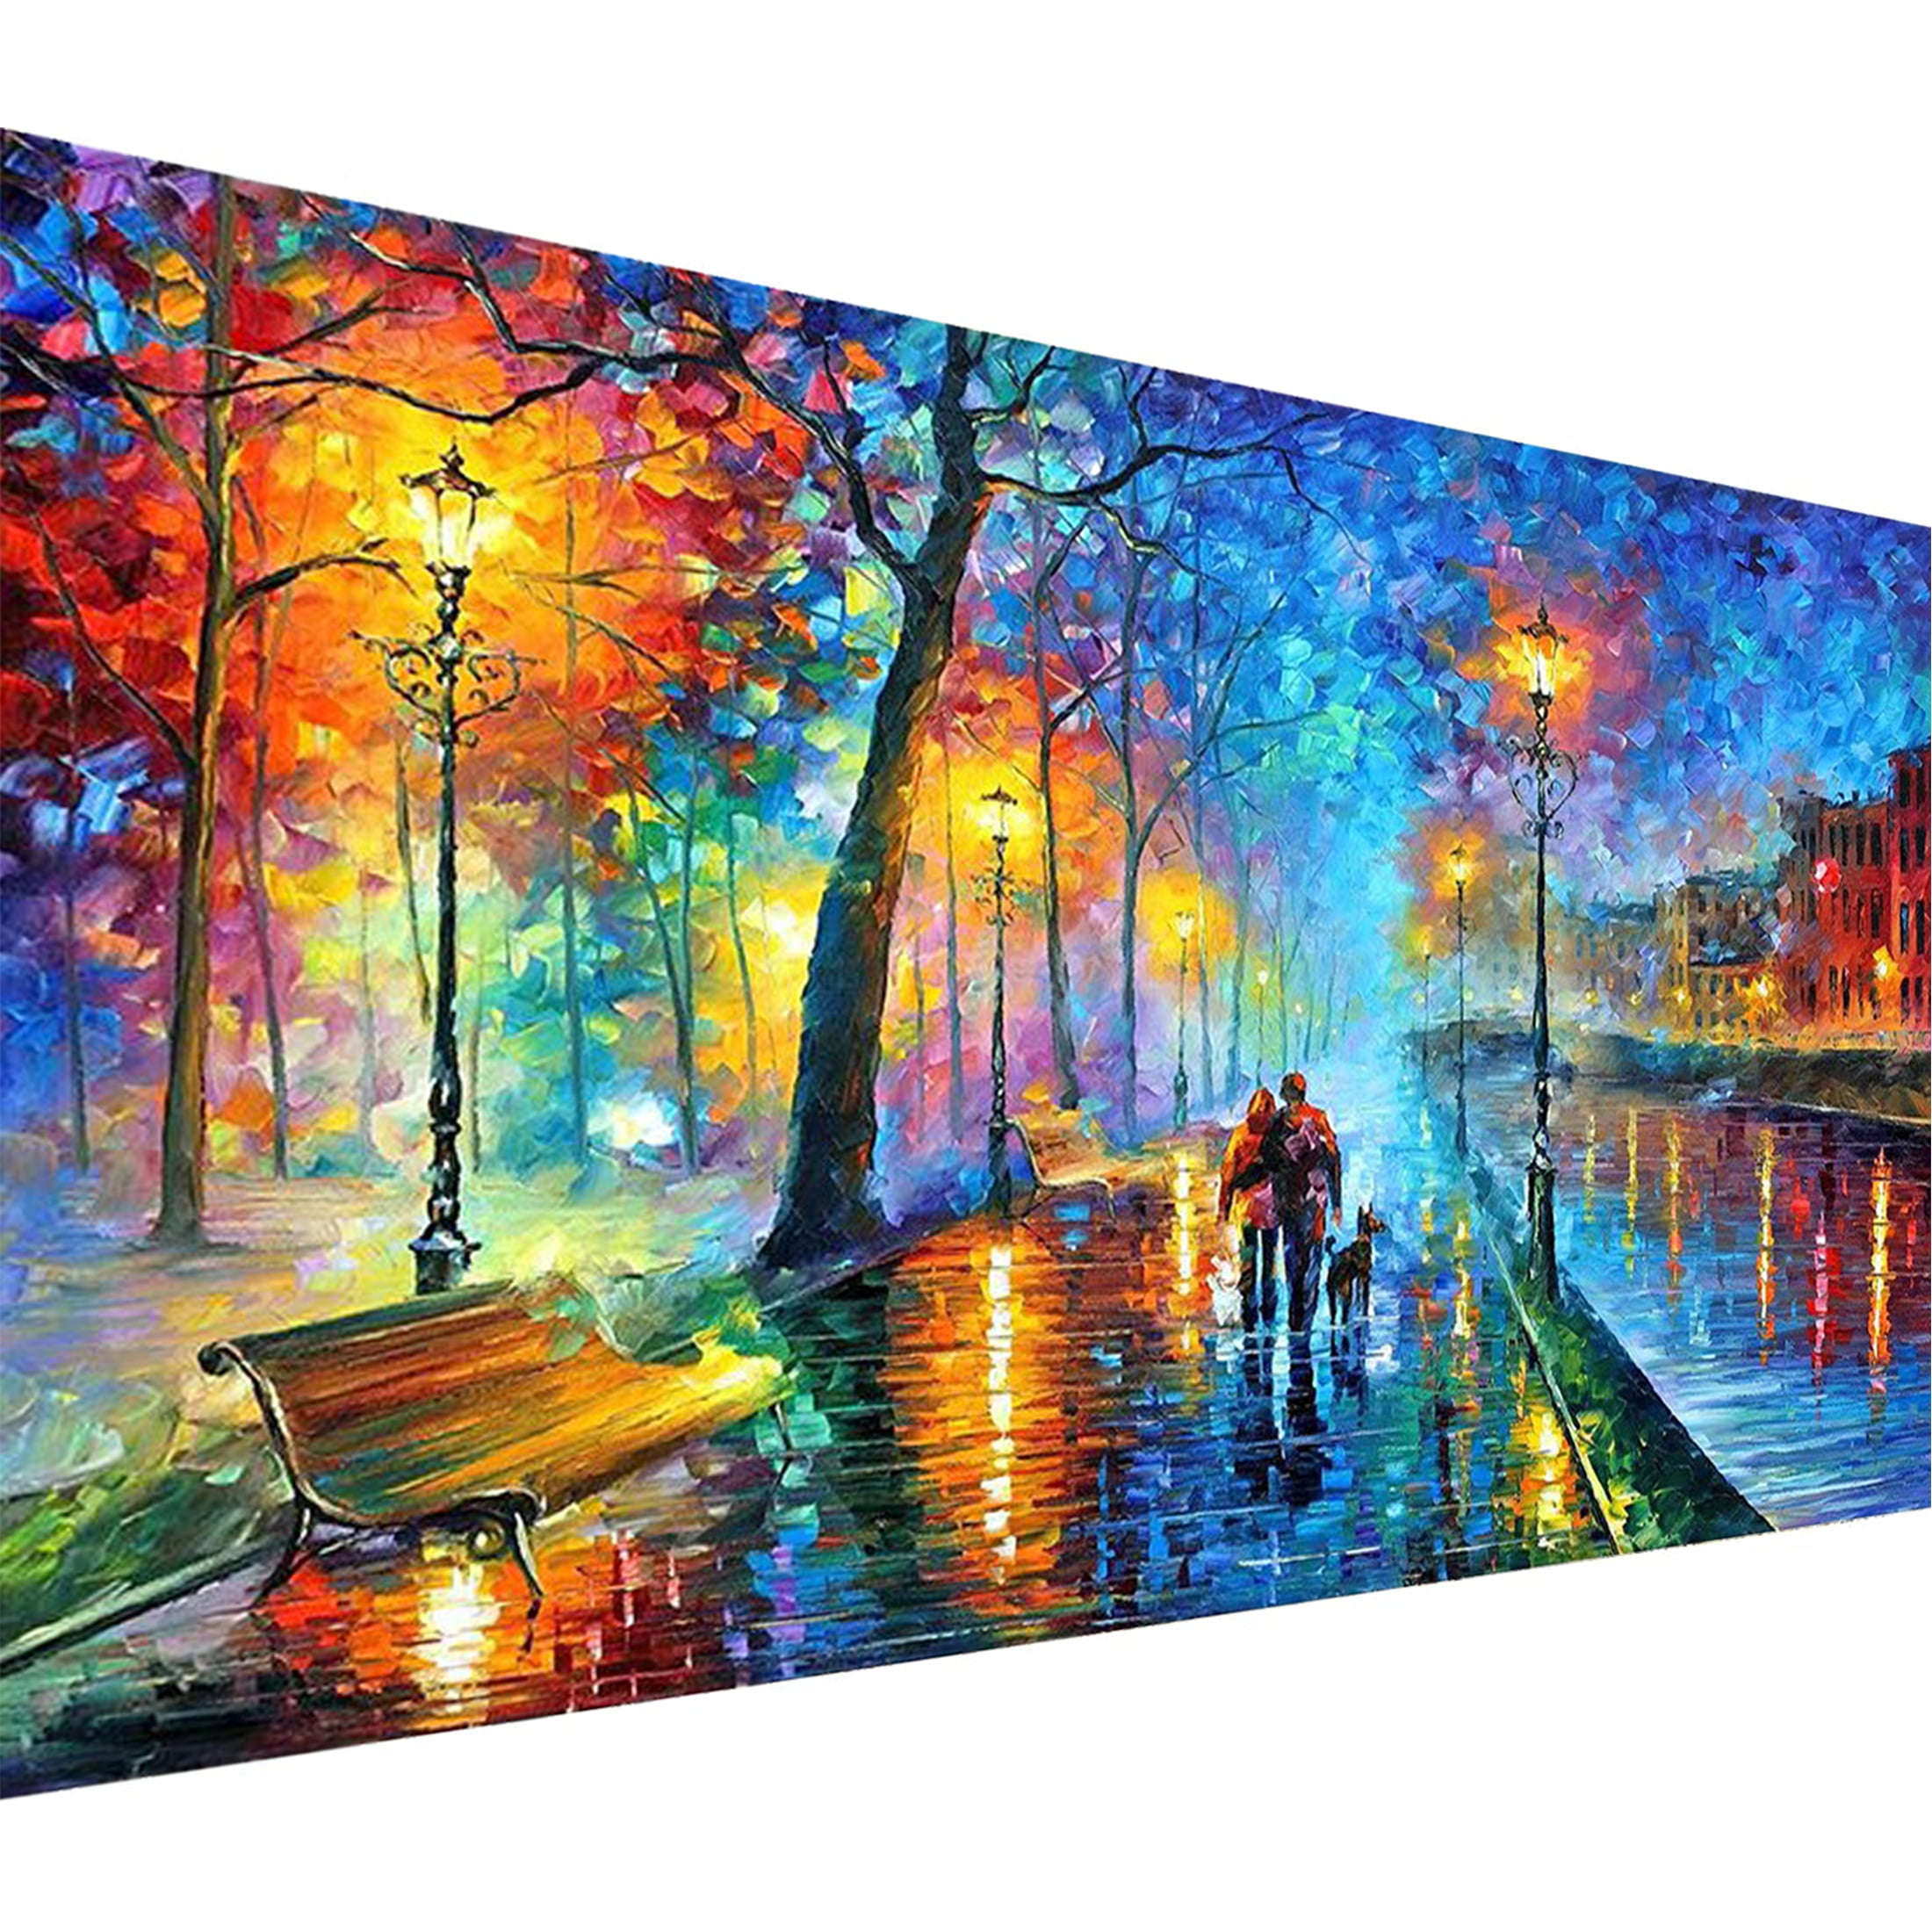 DIY 5D Diamond Painting by Numbers Kits for Adults 16x12 DIY Paintings Crystal Rhinestone Diamond Embroidery Full Drill Cross Stitch Kit Pictures